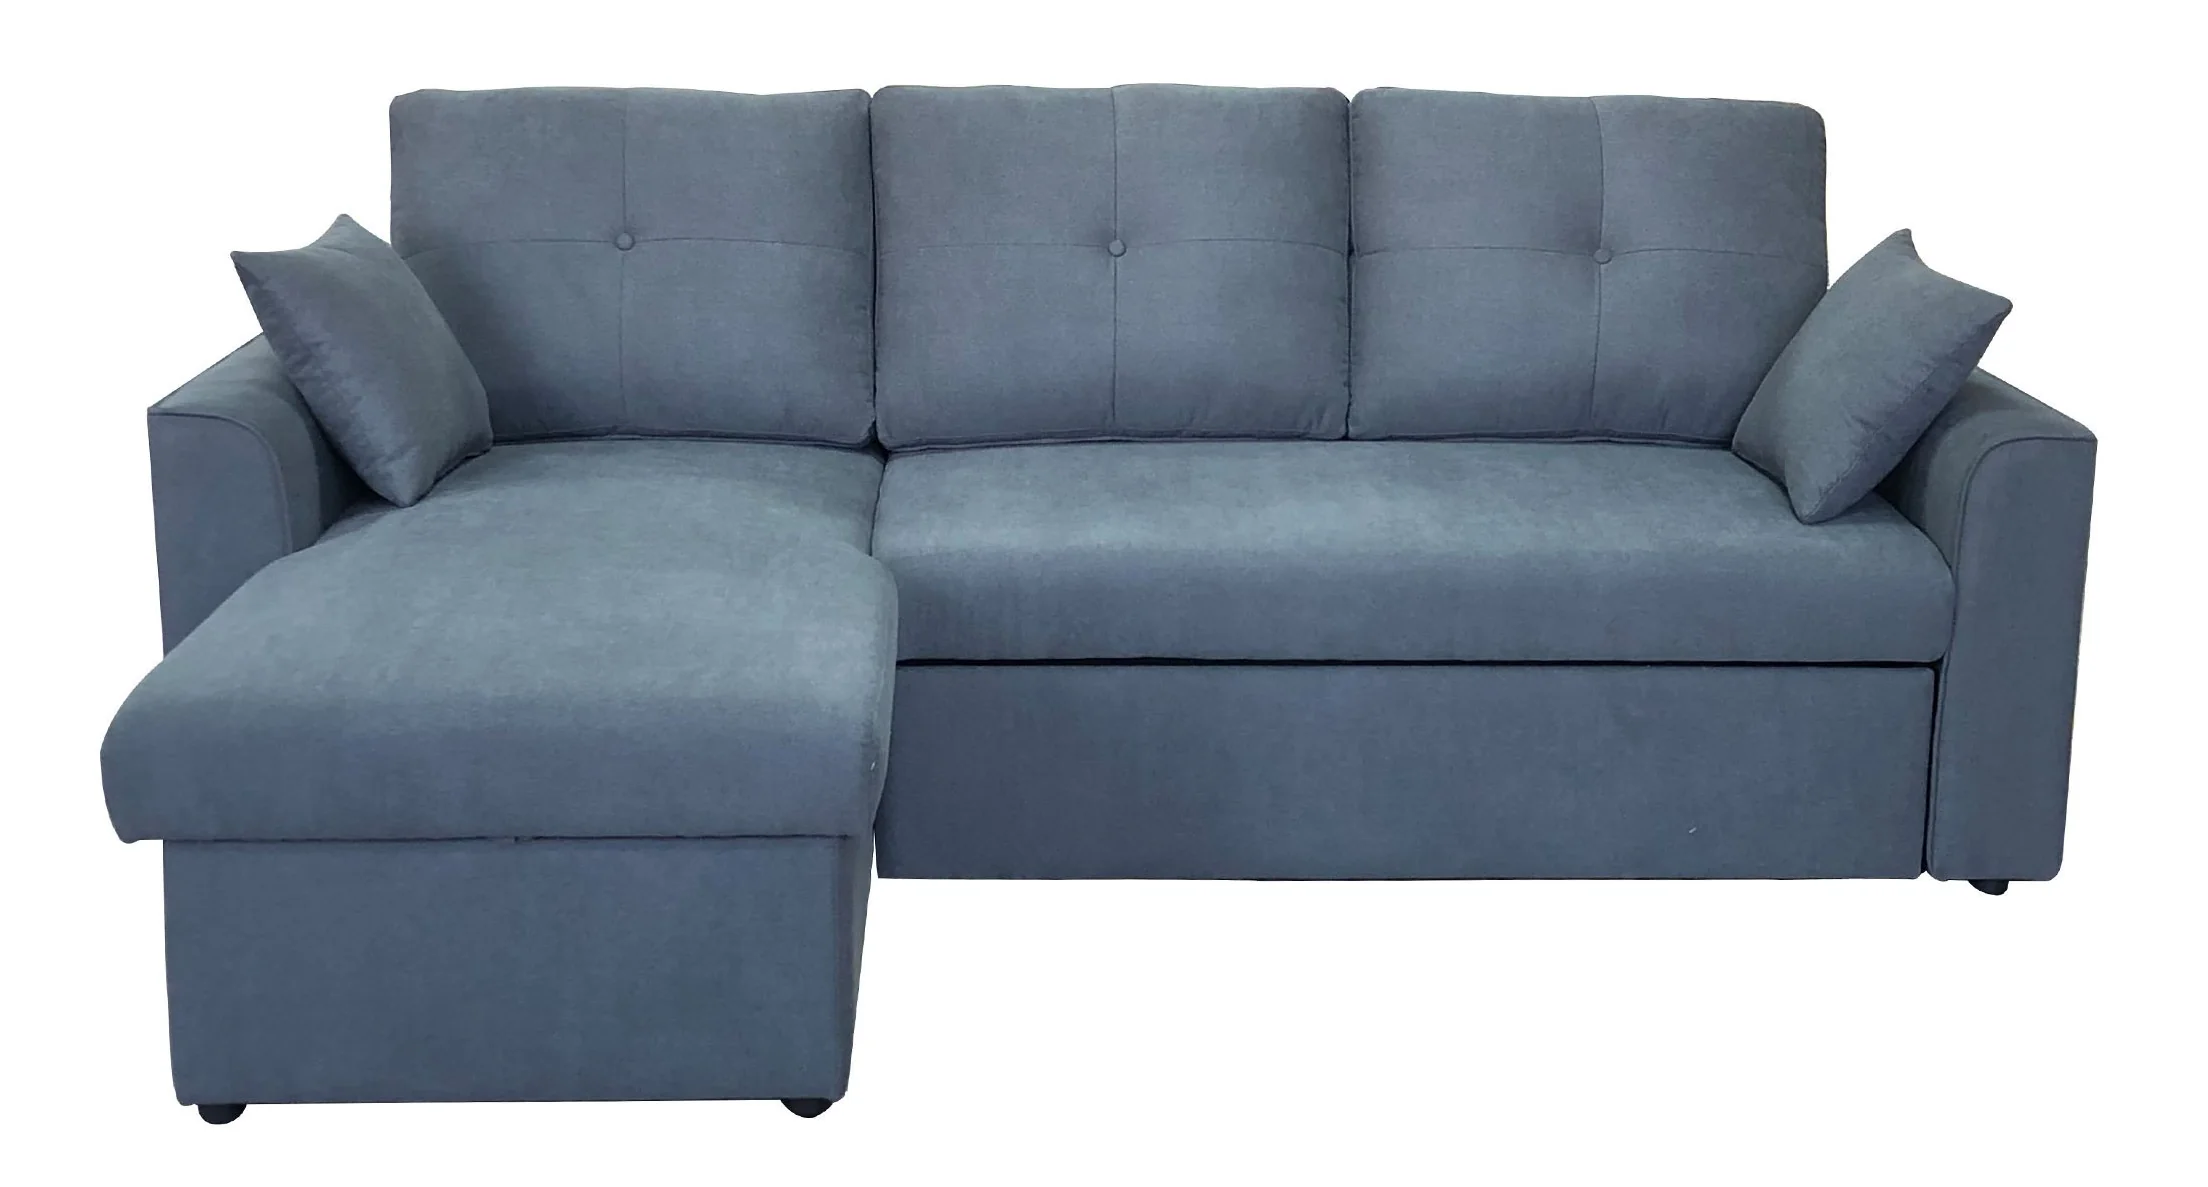 dover - Dover 2 Seater Sofabed & Reversible Chaise